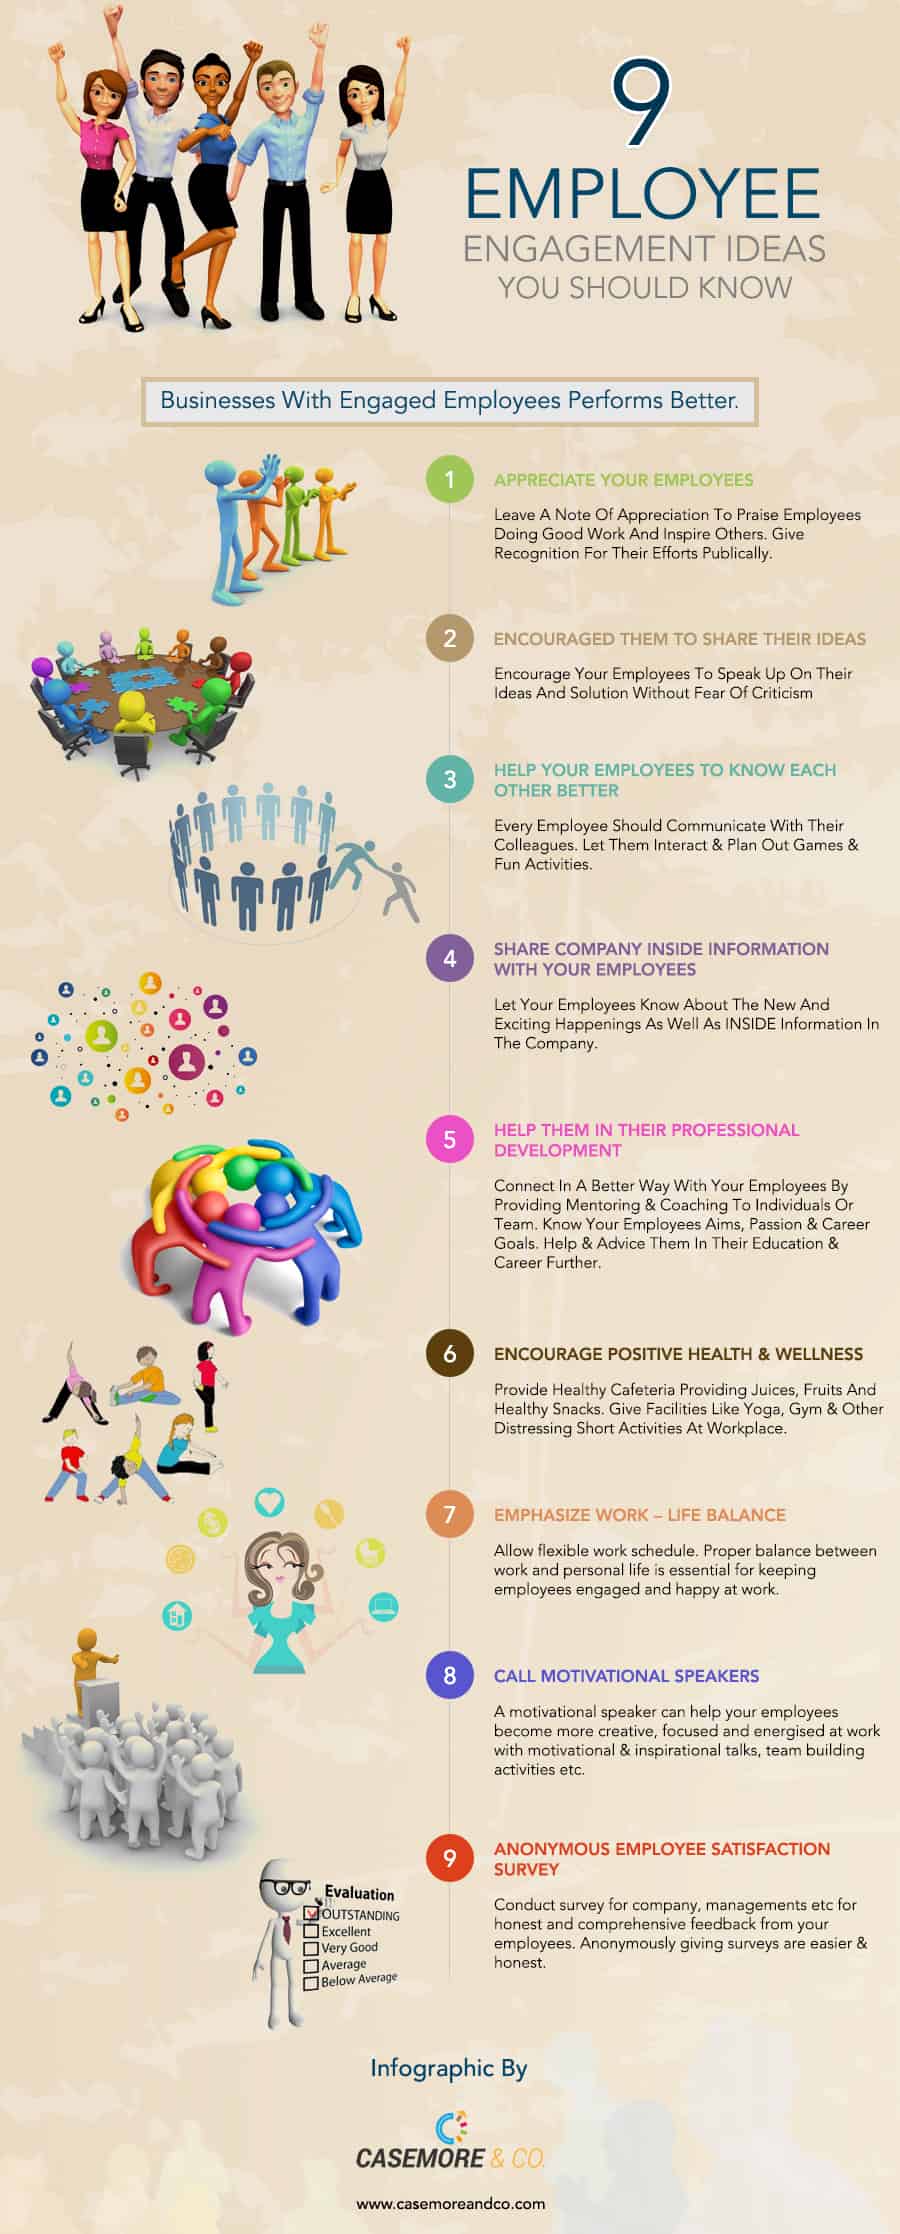 9-employee-engagement-ideas-you-should-know